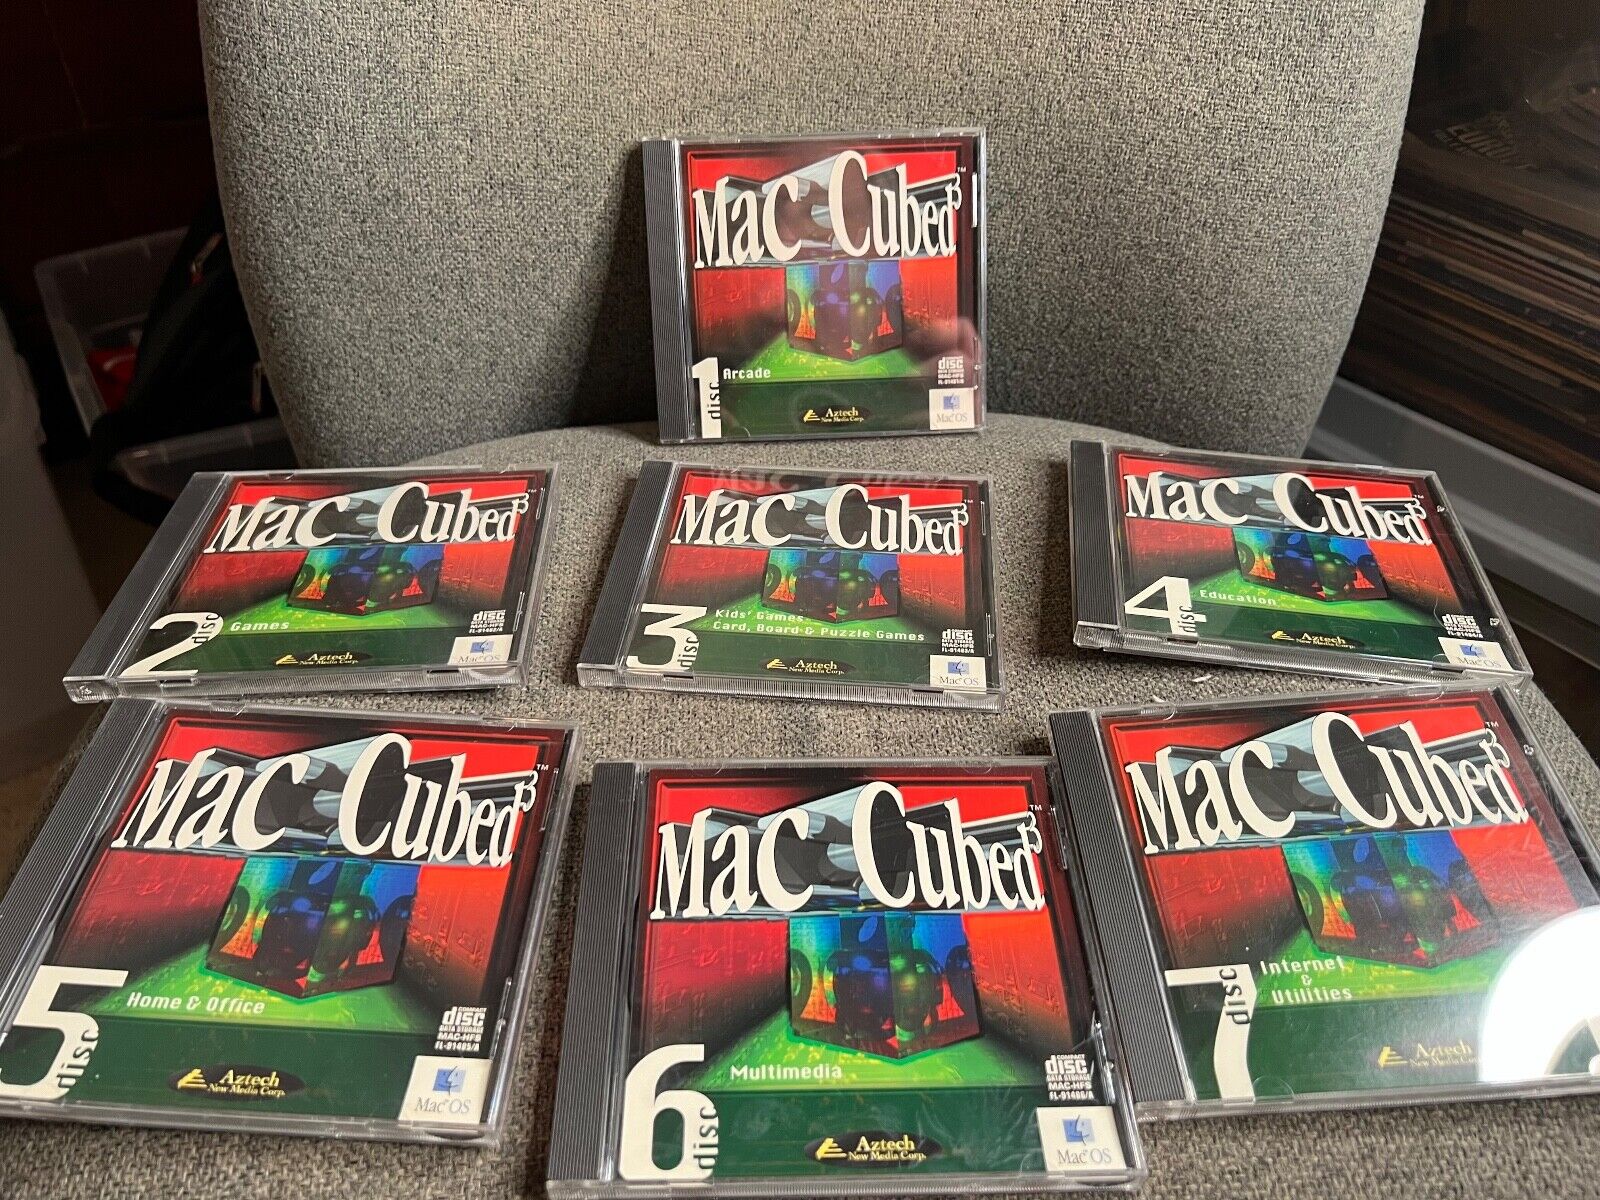 Preowned Vintage Macintosh Software Mac Cubed 3 Lot of 7 CDs Complete